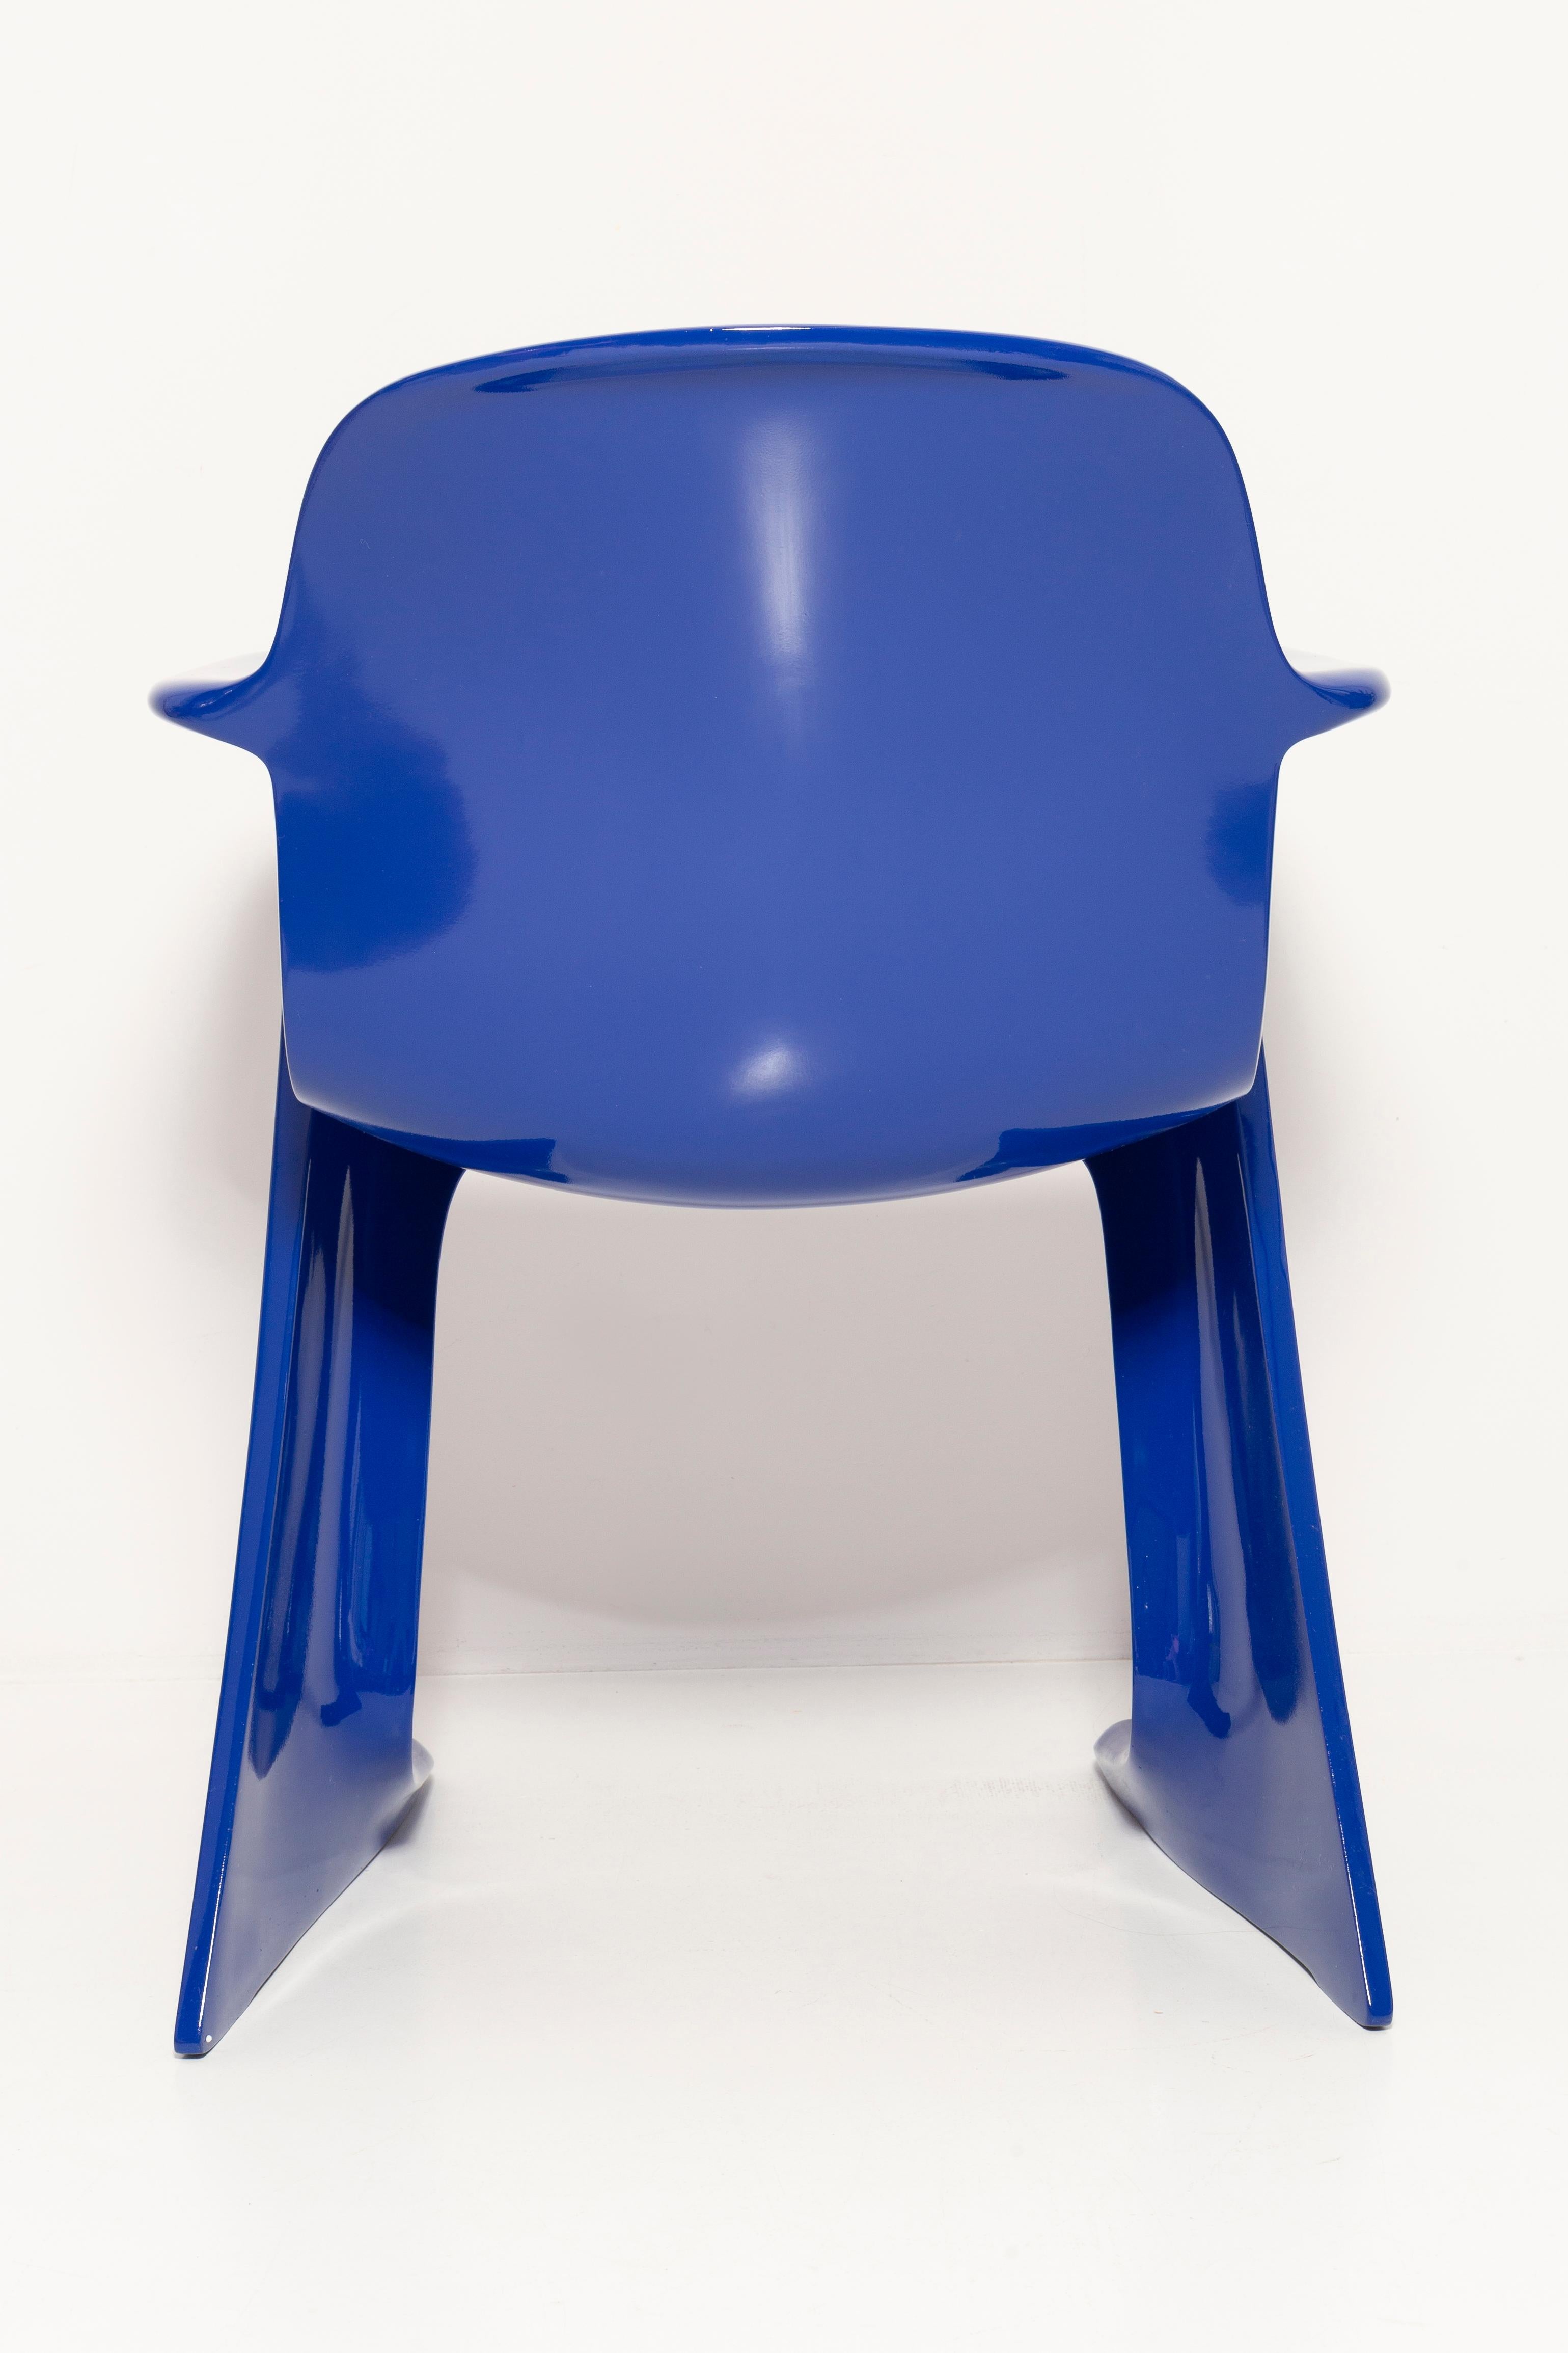 Set of Eight Ultramarine Blue Kangaroo Chairs, by Ernst Moeckl, Germany, 1968 For Sale 4